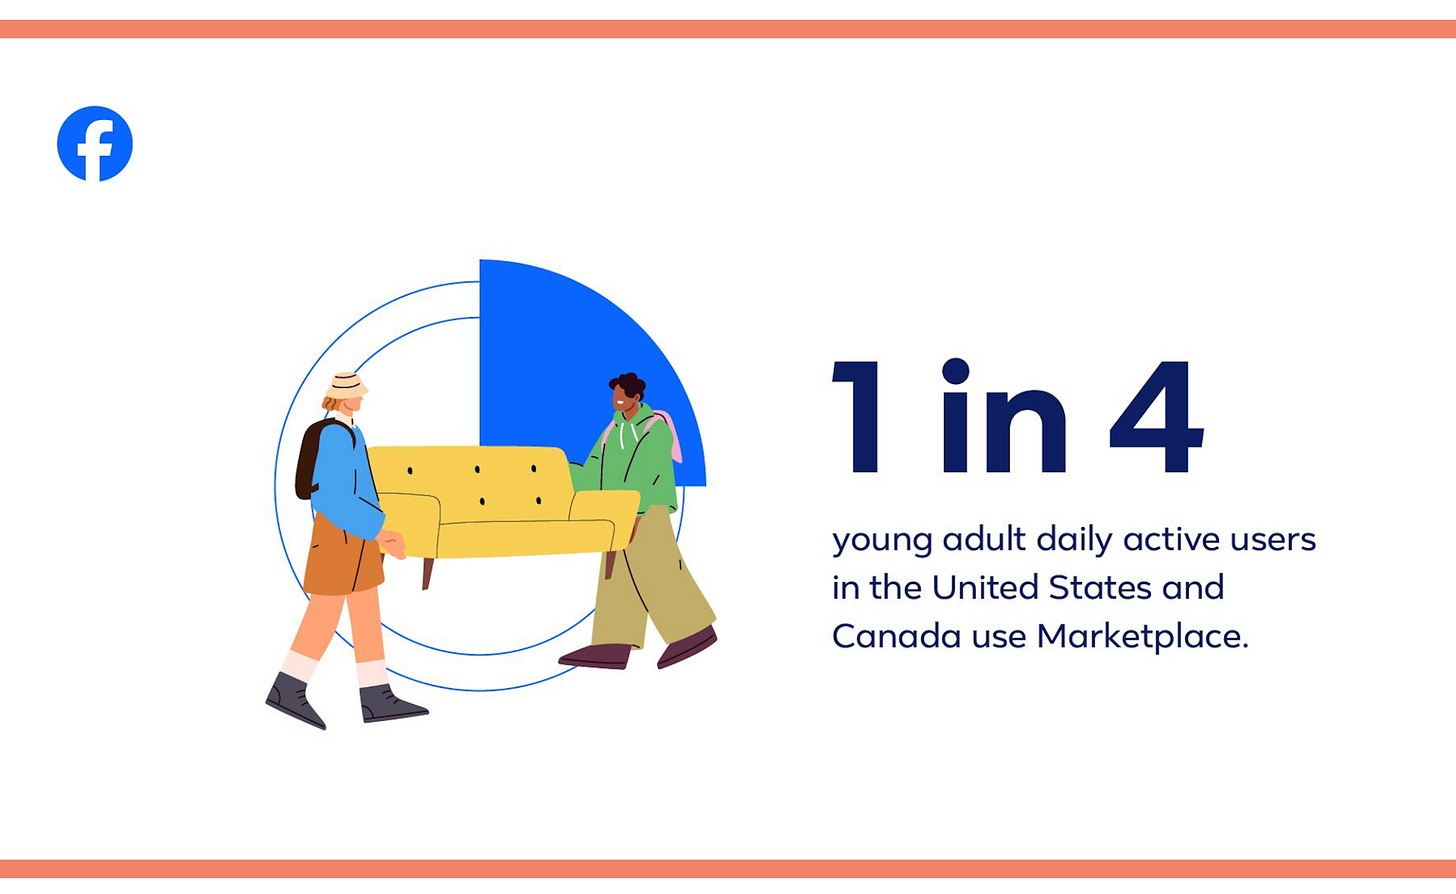 Facebook graphic. Two animated figures carrying a couch. Text reads: 1 in 4 young adult daily active users in the United States and Canada use Marketplace